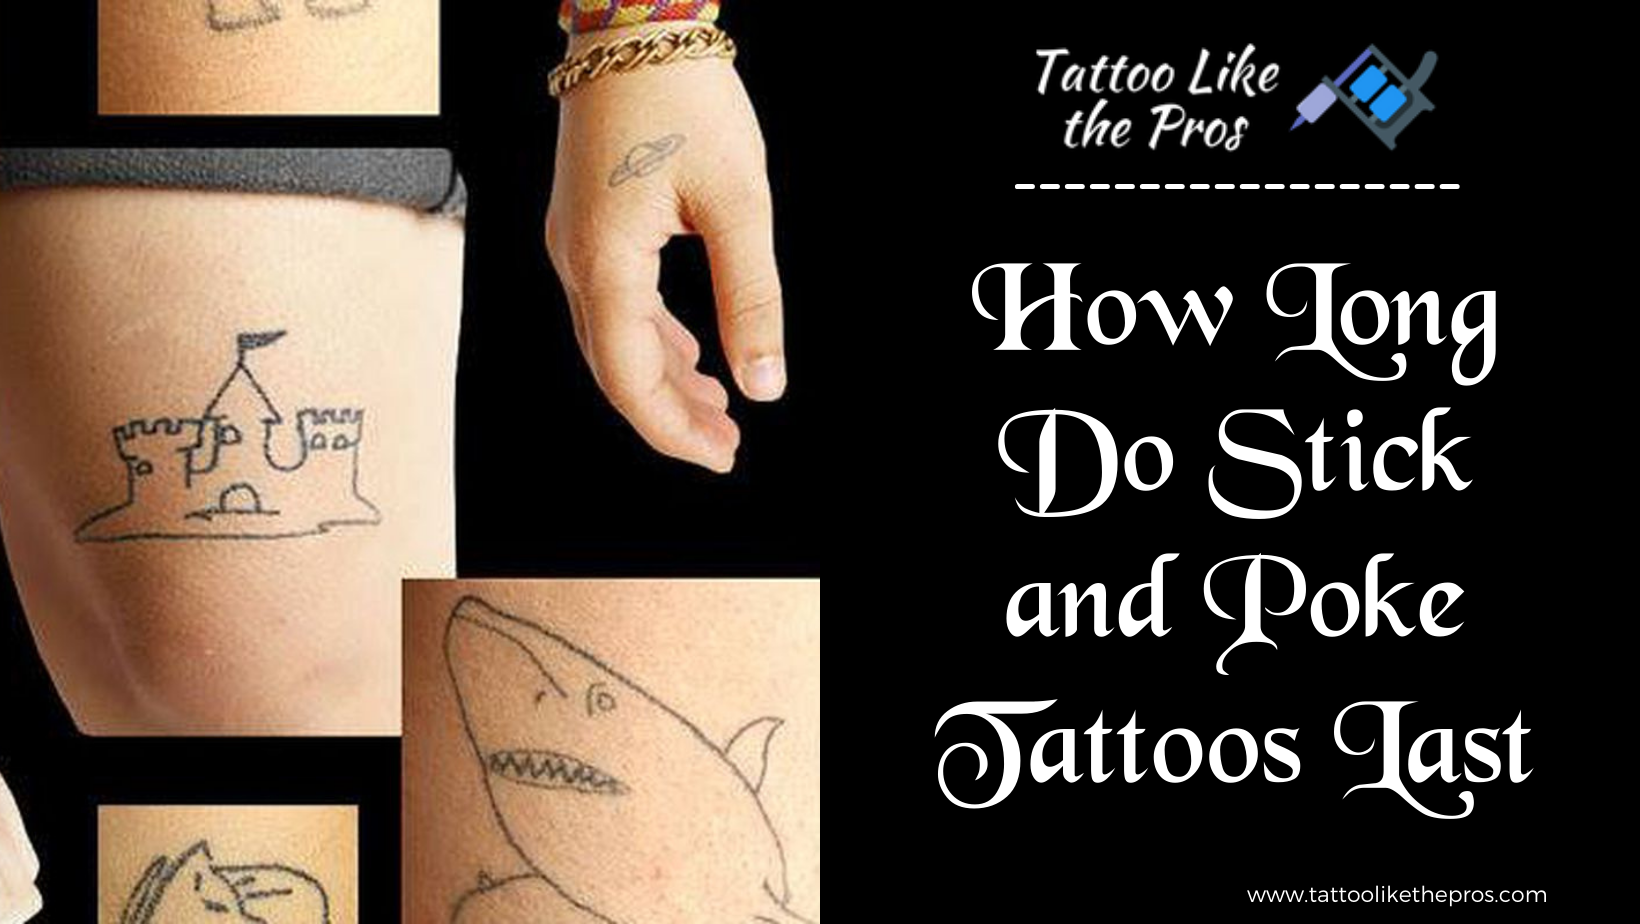 How Long Do Stick and Poke Tattoos Last?